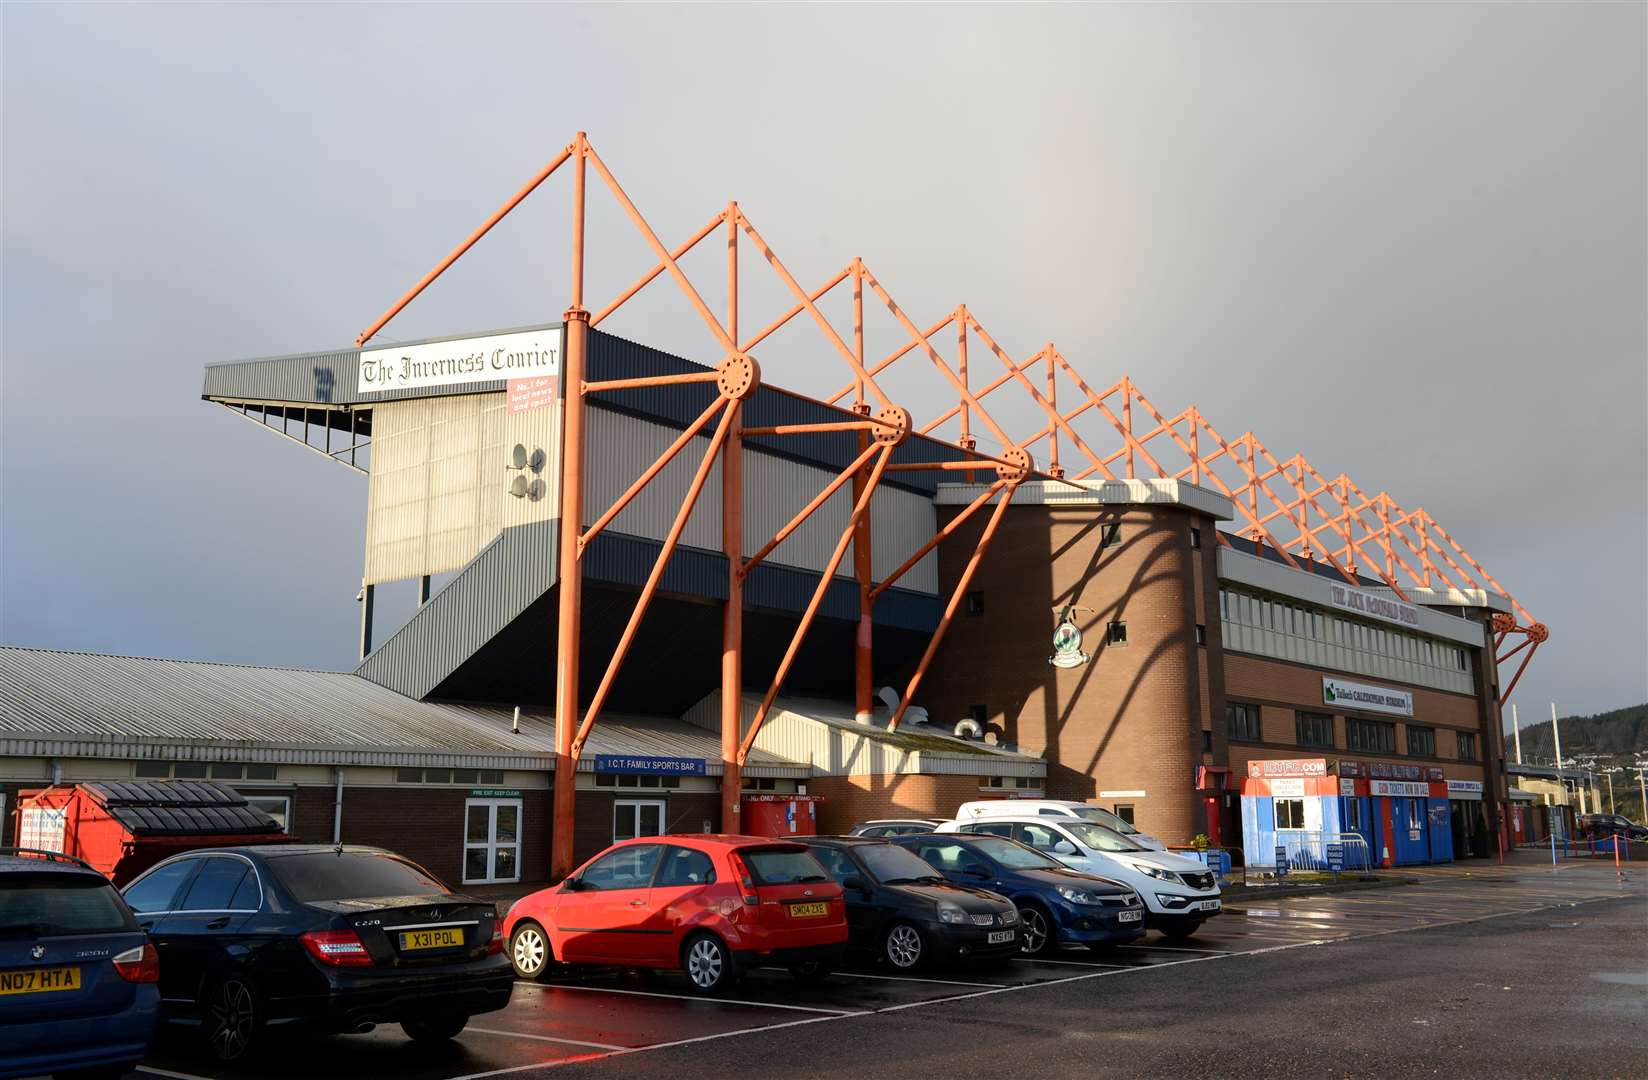 Inverness Caledonian Thistle start their season away from home at Tannadice, with Arbroath the first visitors to the Highlands of the season.